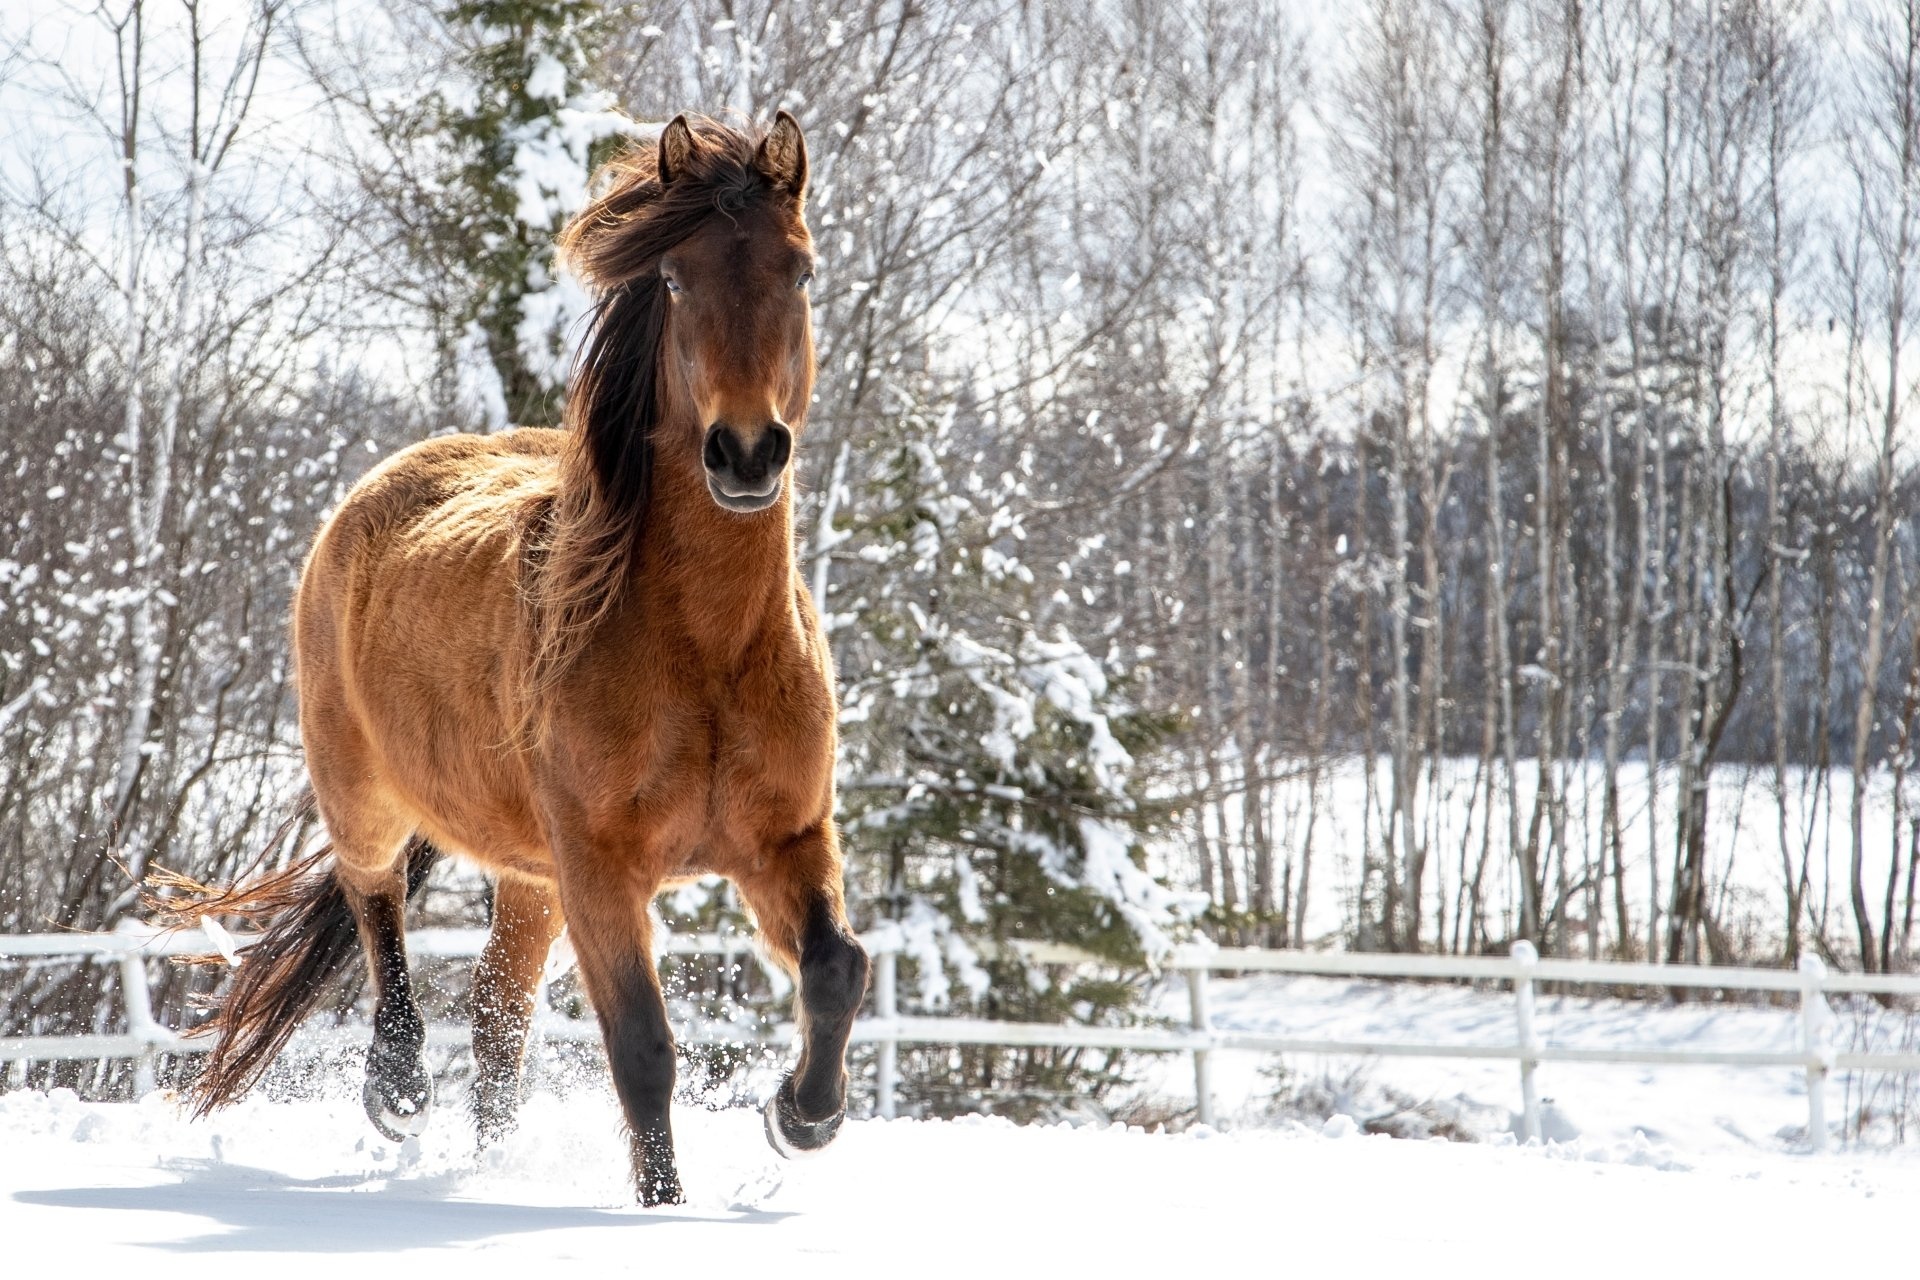 Horses in the snow, 4K ultra HD wallpaper, Stunning horse photography, Majestic animals, 1920x1280 HD Desktop